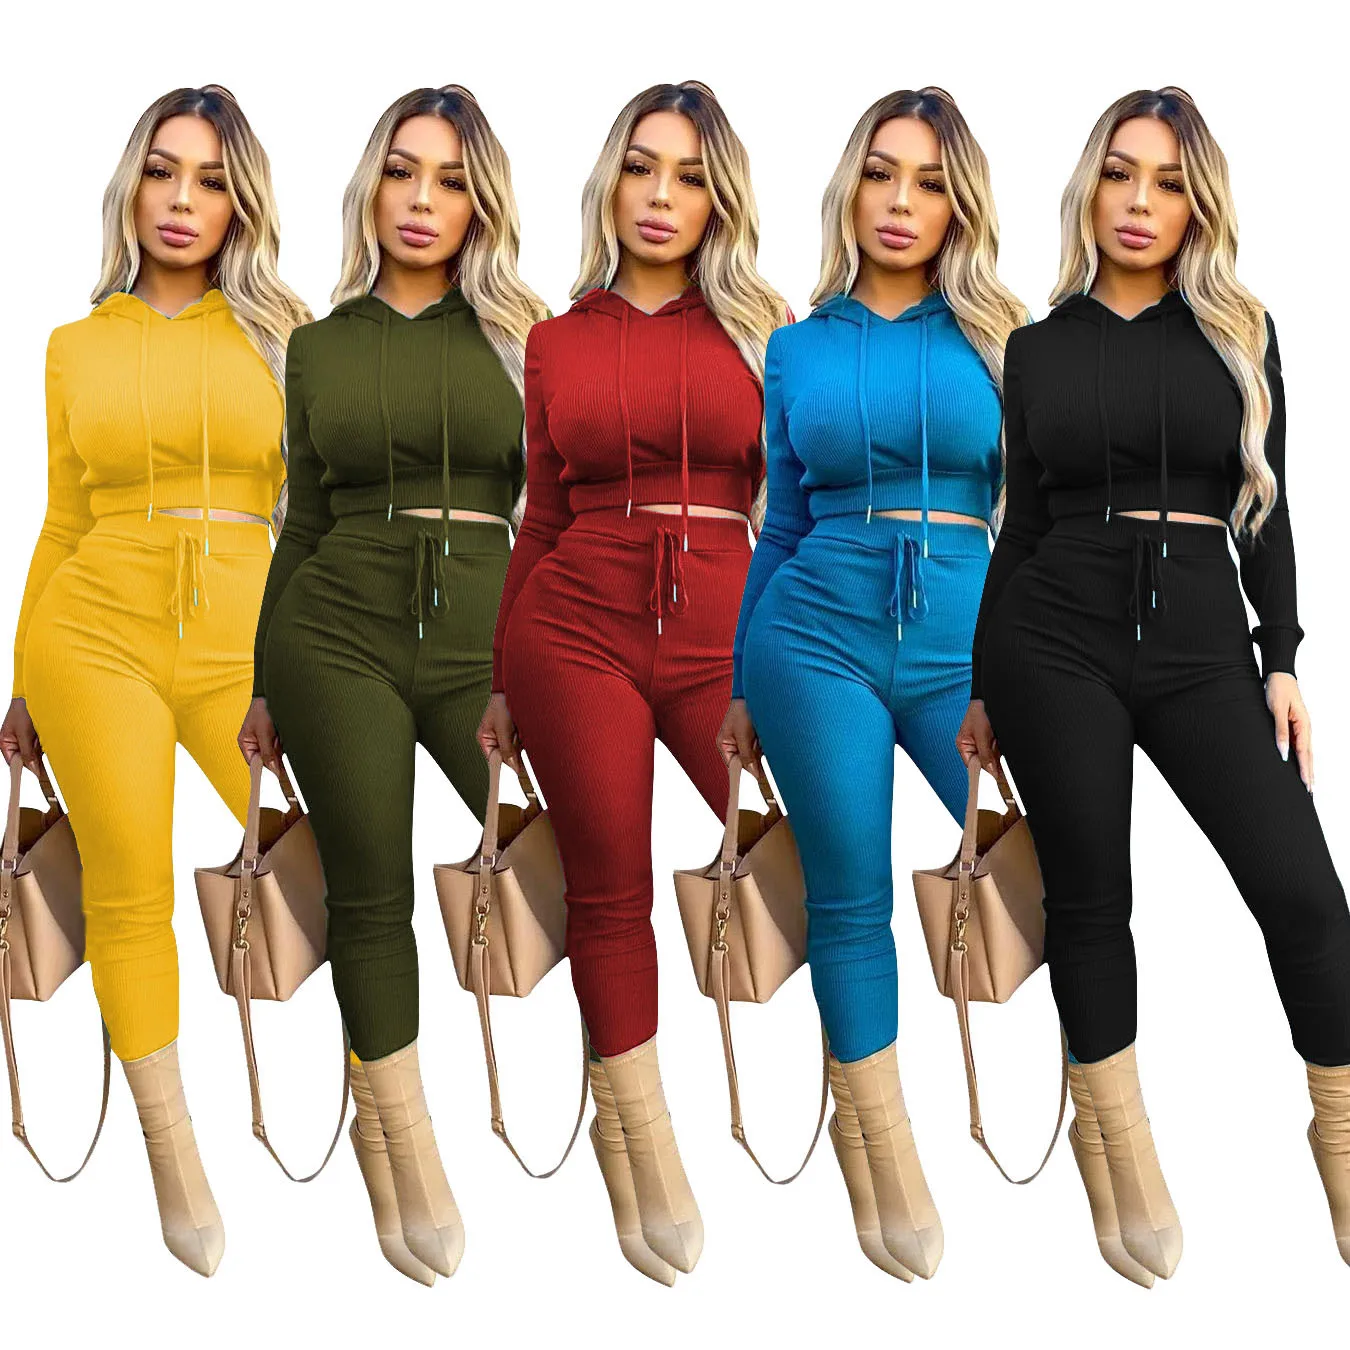 

Vendors Wholesale Women Clothing New Design Ribbing Crop Top And Slim Pants Casual Sweat Suit Plain Hoodie Women Two Piece Sets, Picture shown